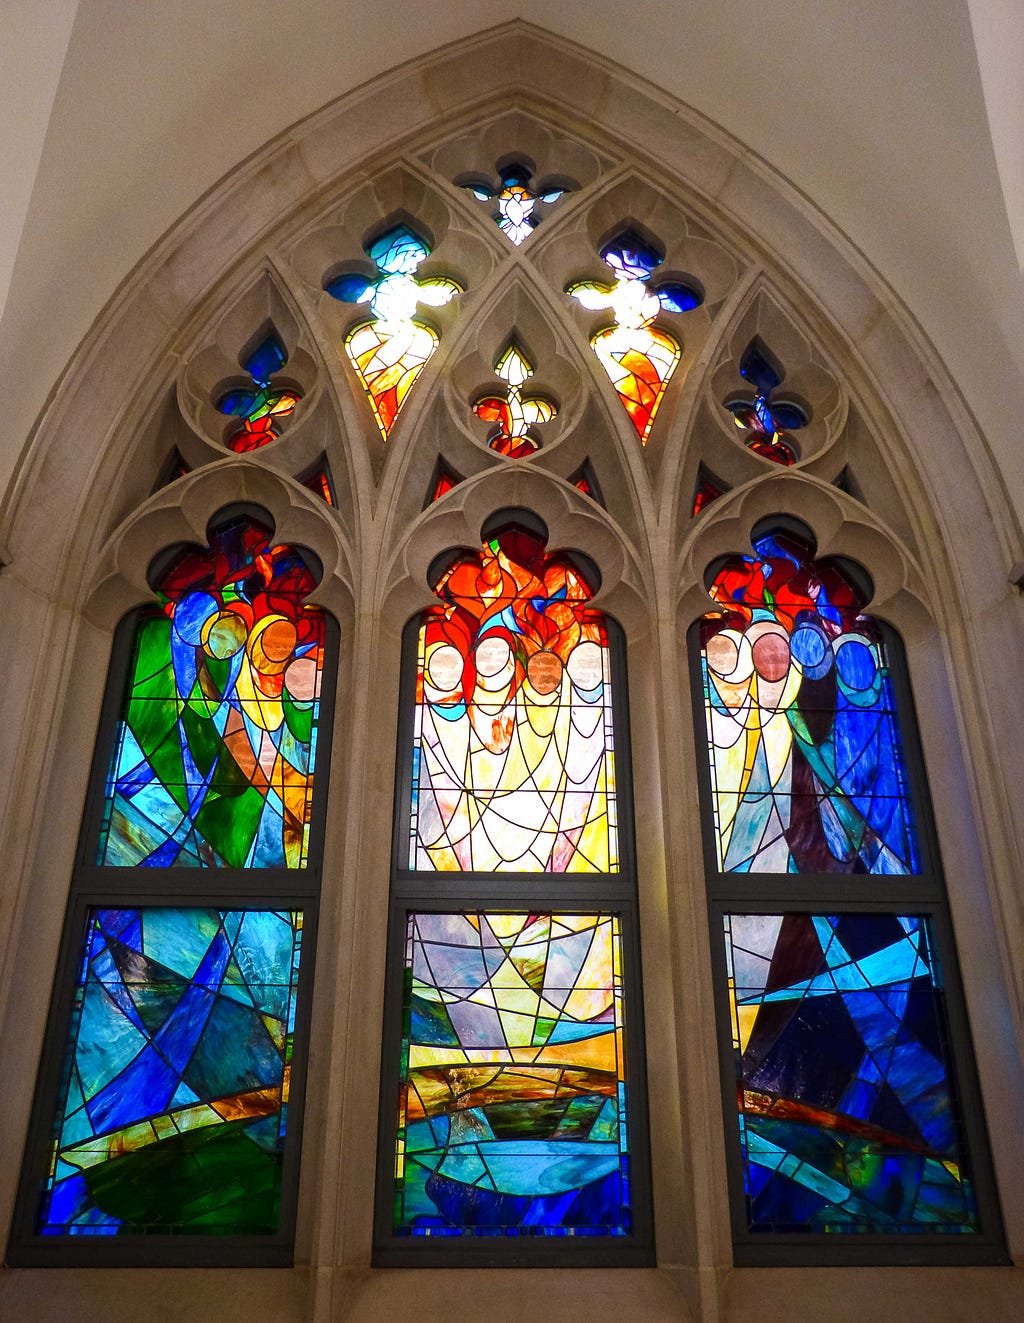 The Pentecost Window, a large stained glass window at Duke Divinity School